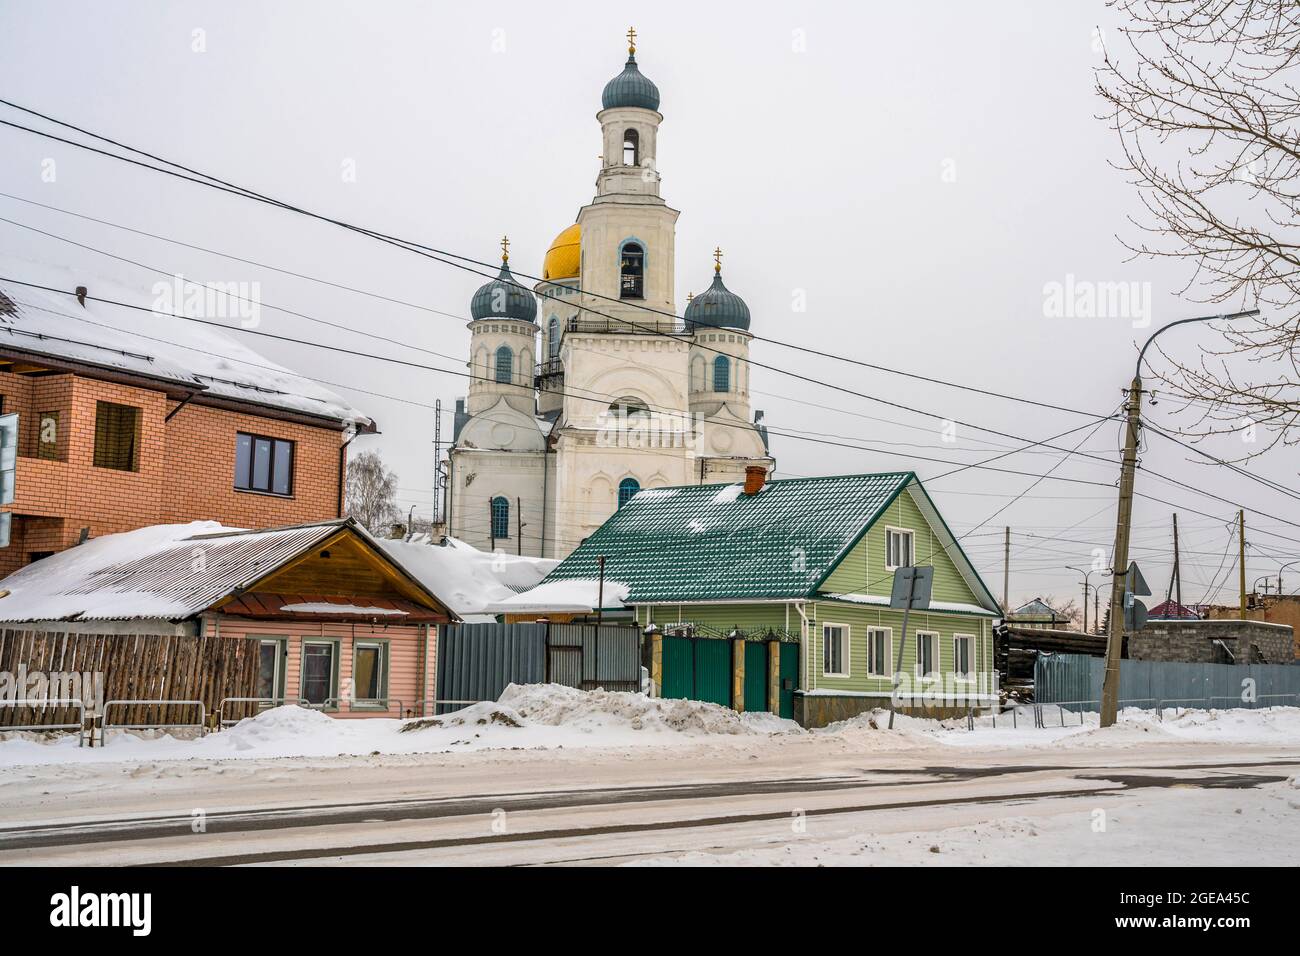 A Russian Orthodox church in a small manufacturing town in the Ural Mountains region in Russia. Stock Photo